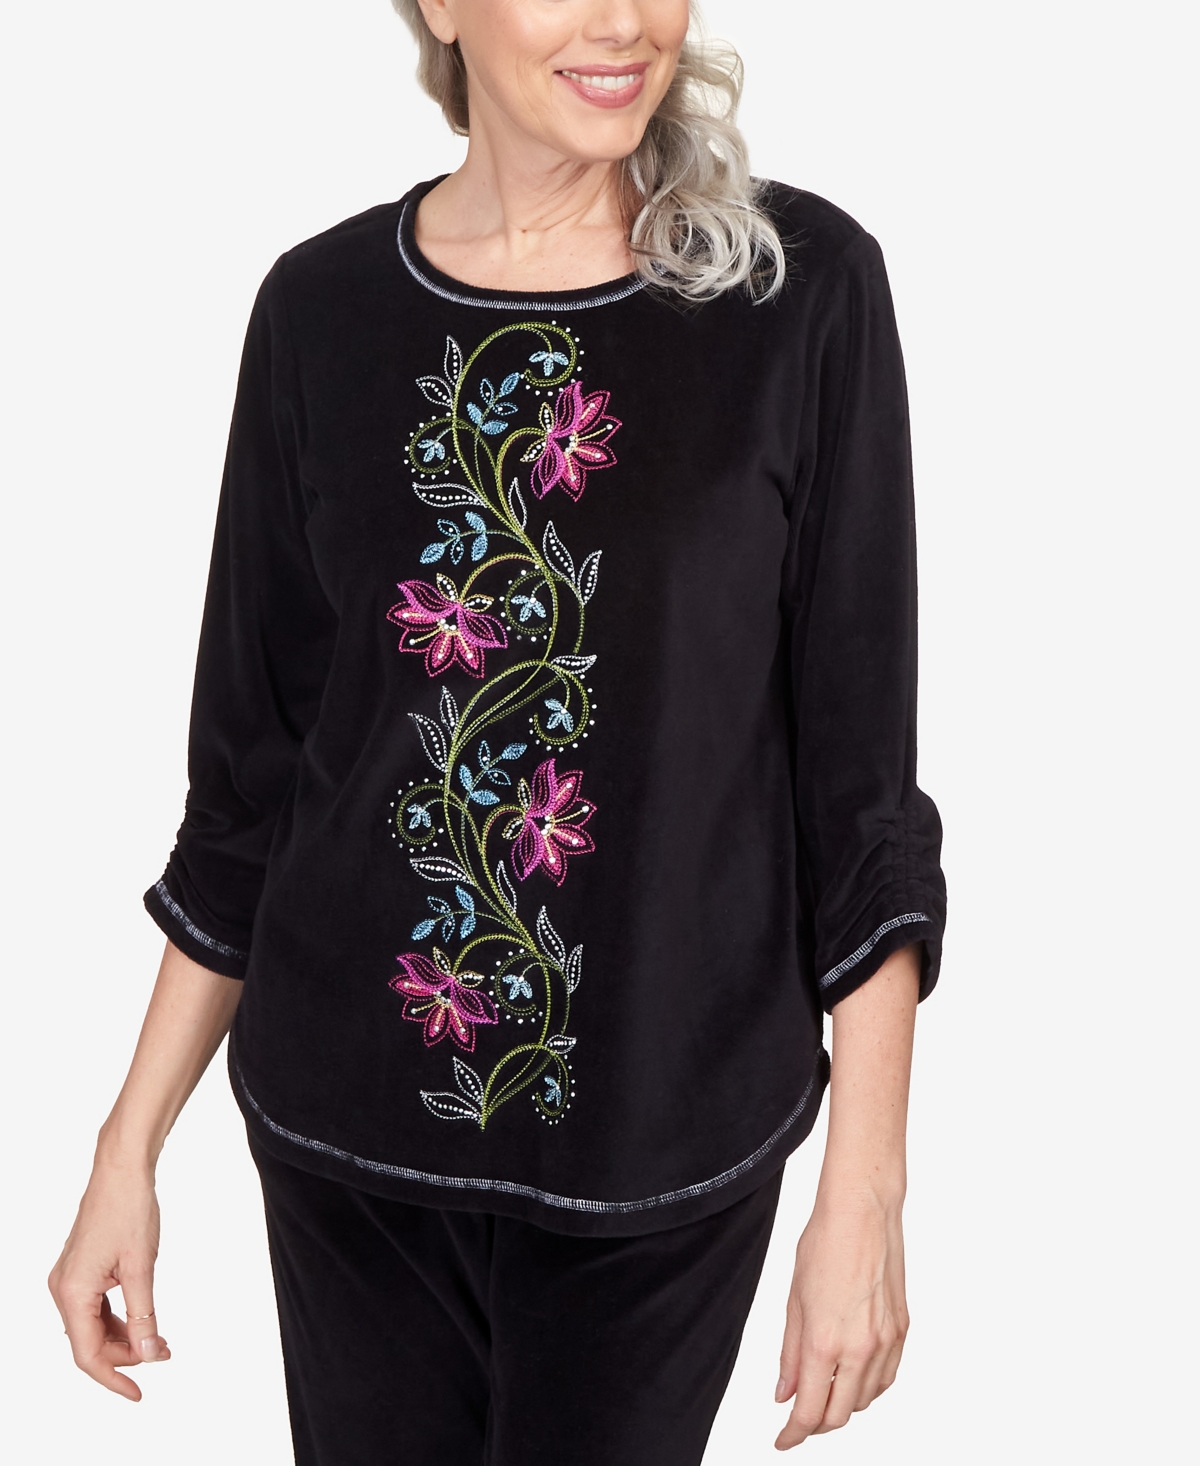 ALFRED DUNNER WOMEN'S DRAMA QUEEN CENTER FLORAL EMBROIDERED VELOUR SHIRTTAIL TOP